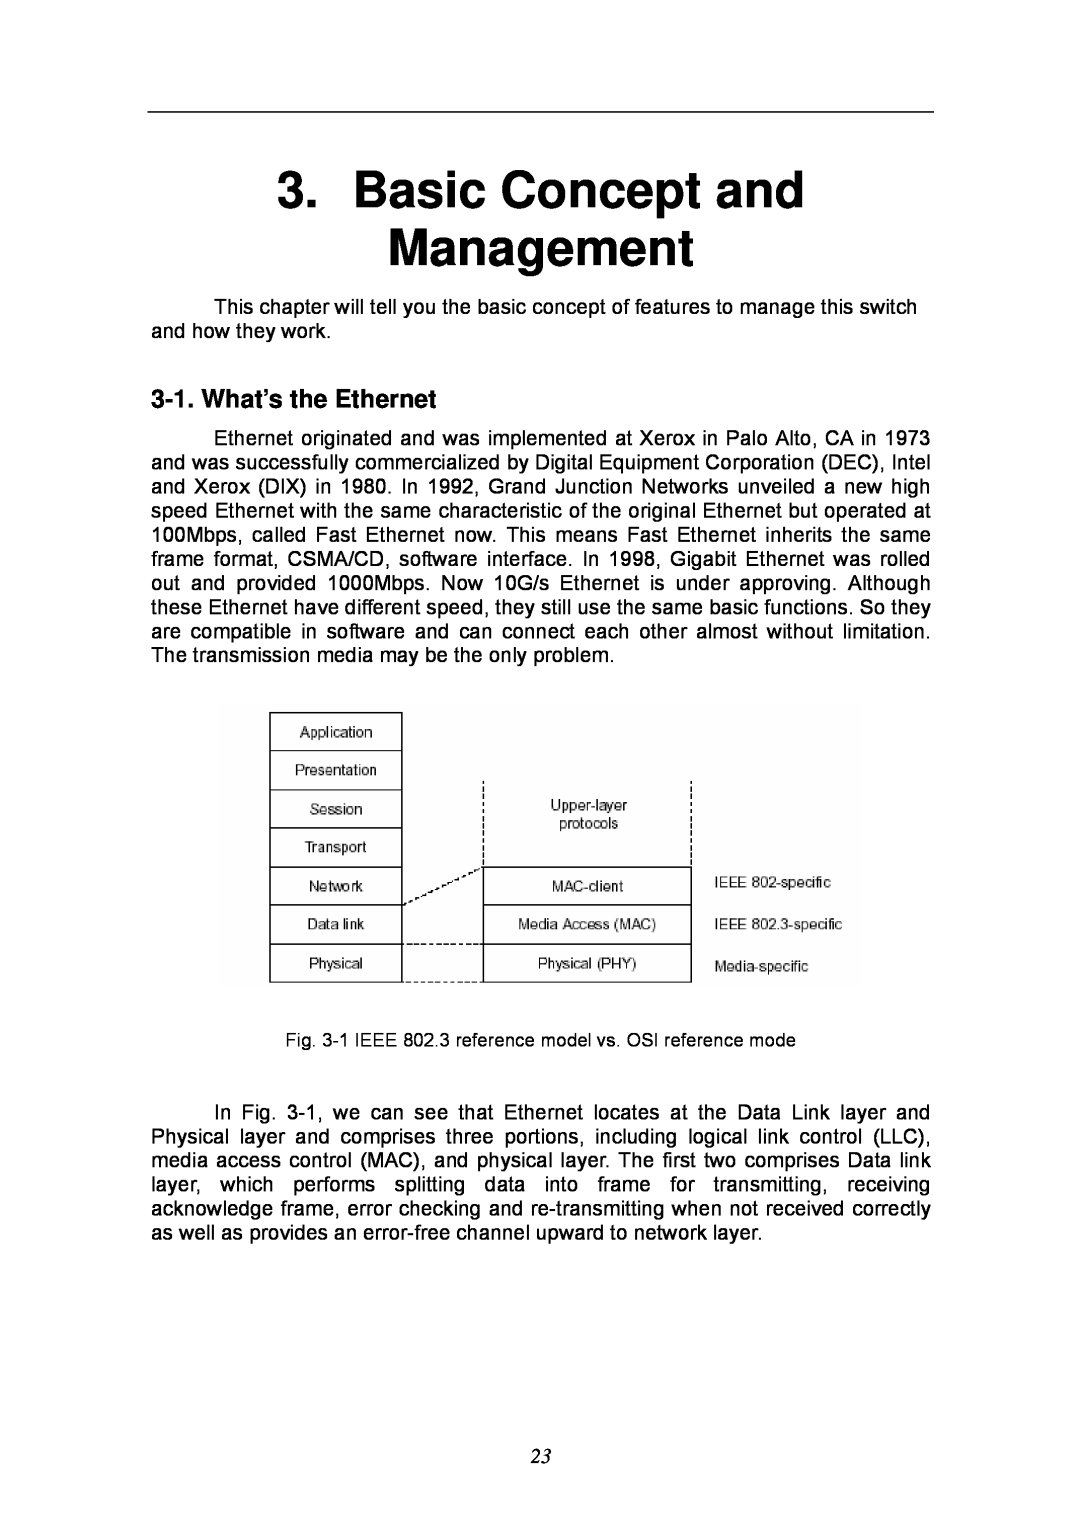 KTI Networks KGS-2404 manual Basic Concept and Management, What’s the Ethernet 